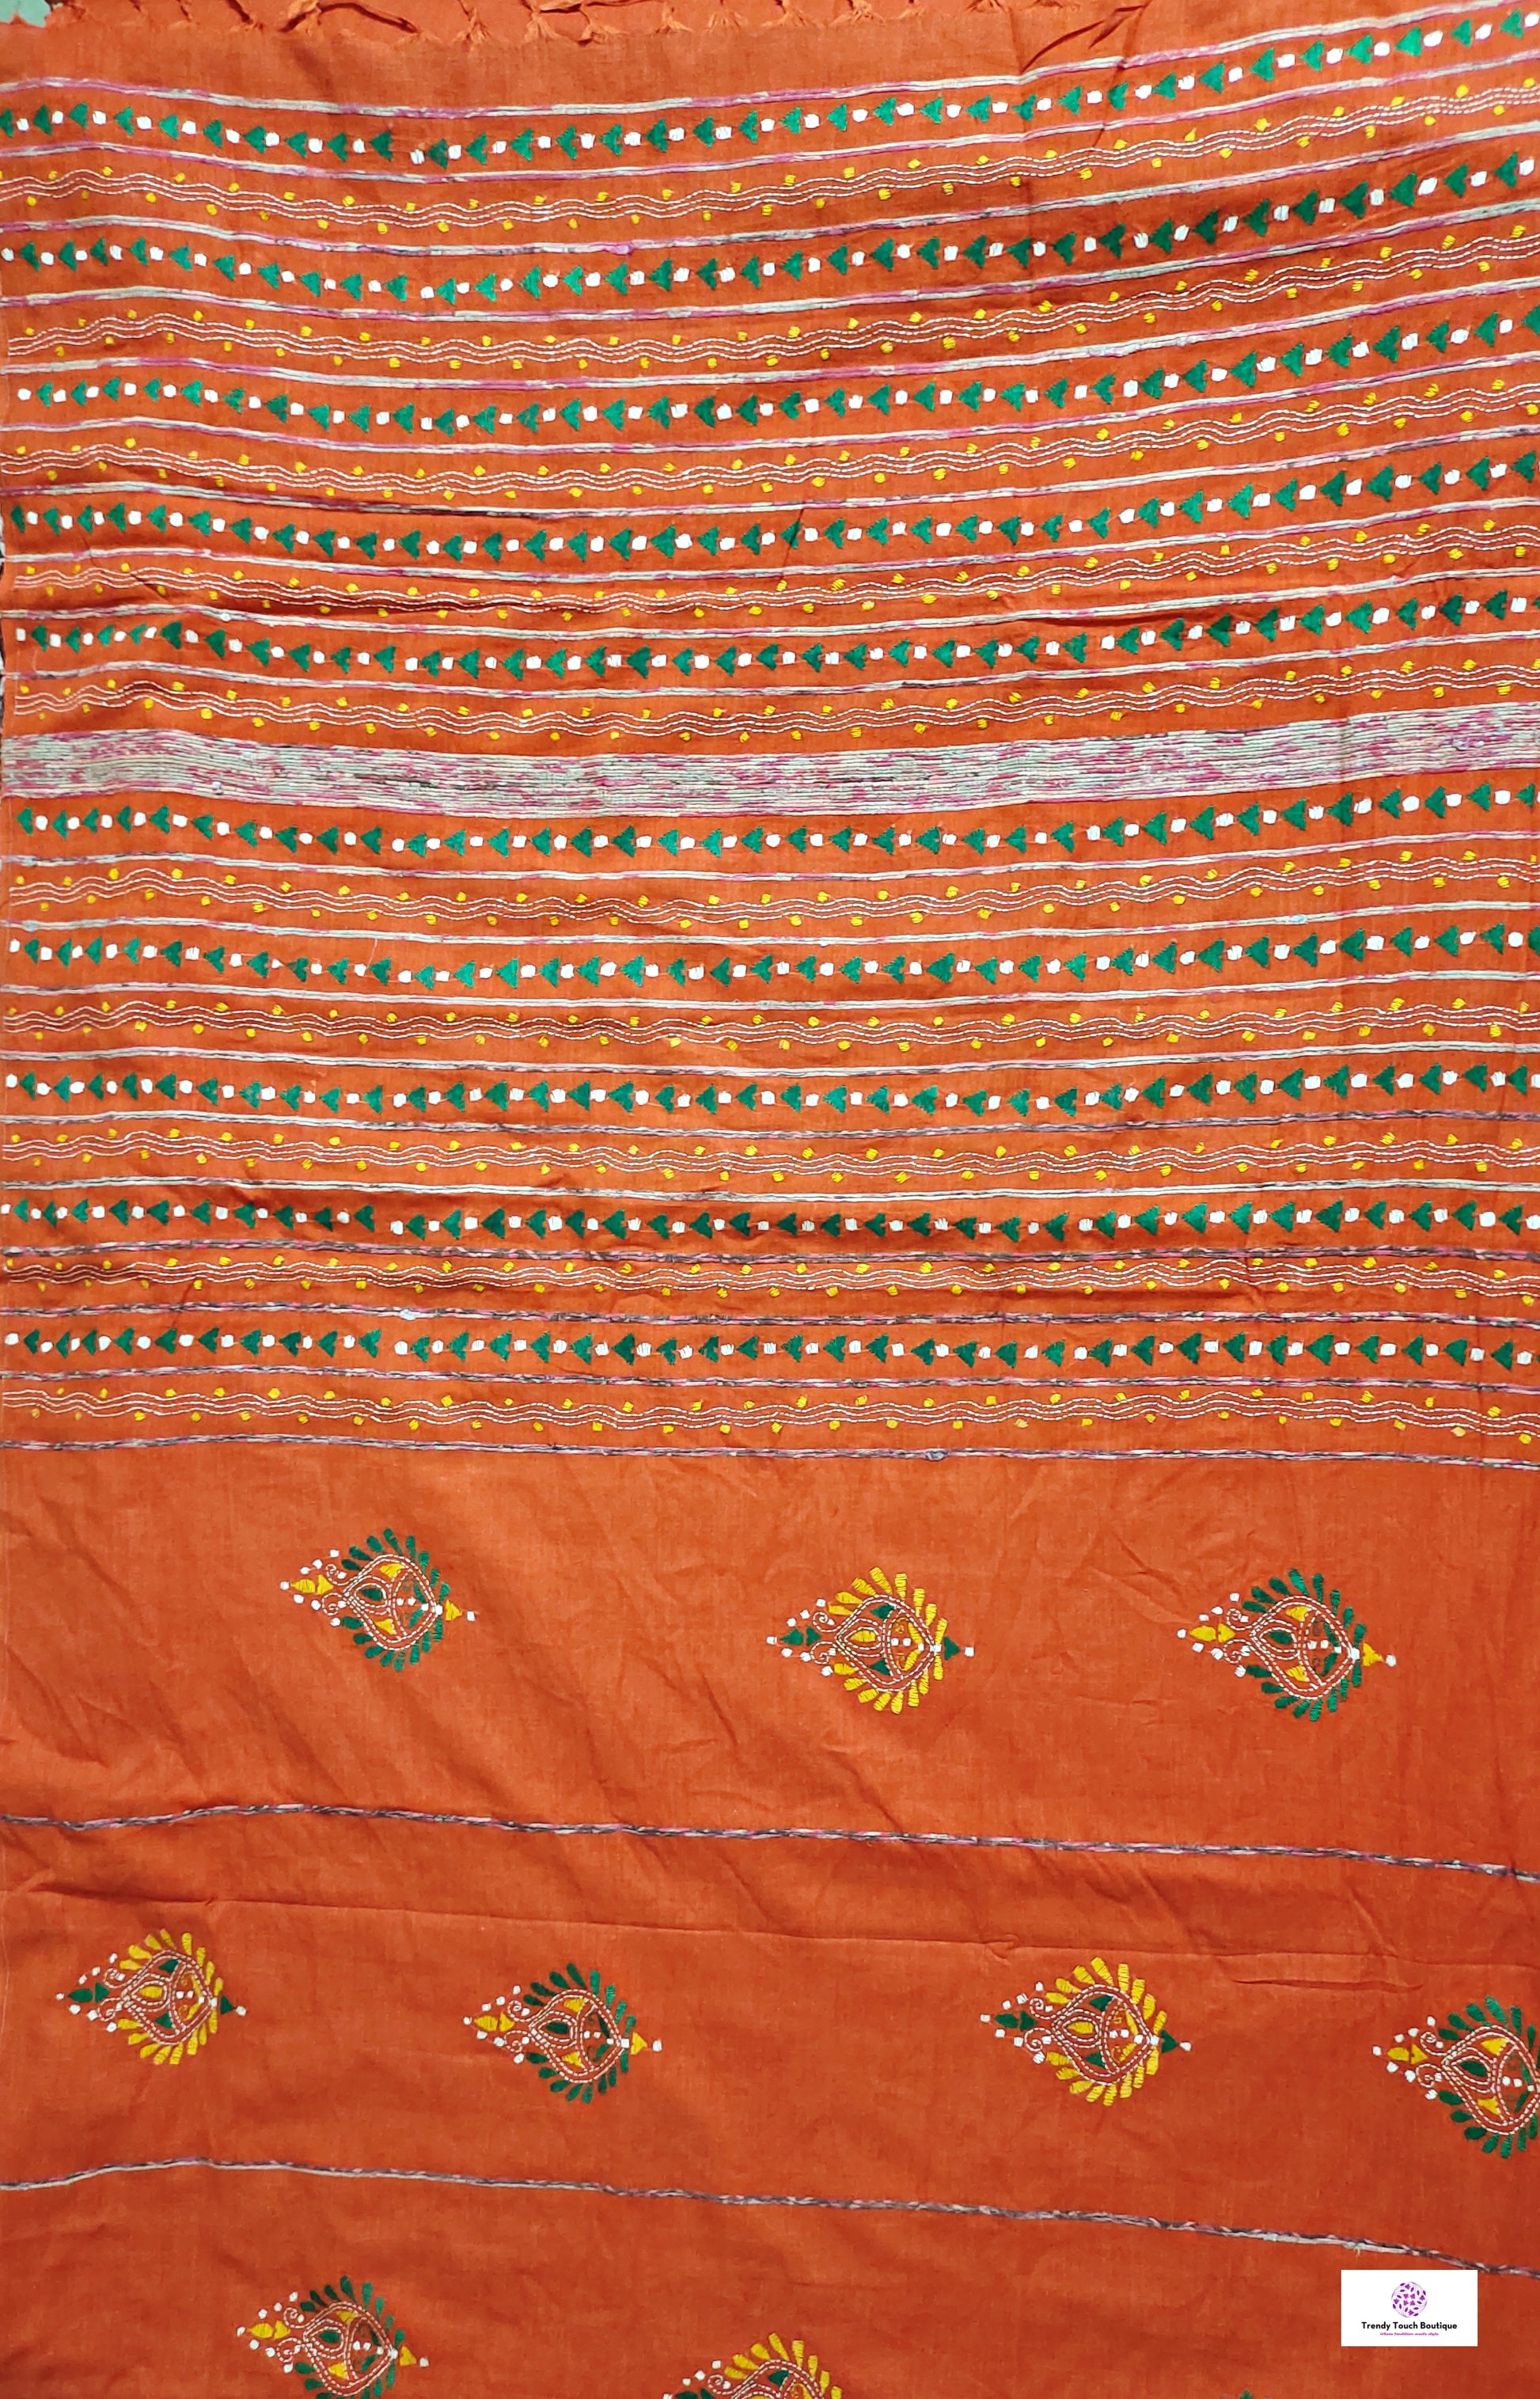 Orange green yellow white khesh khadi cotton handloom saree with hand embroidered kantha stitch summer celebration marriage function saree style with blouse piece